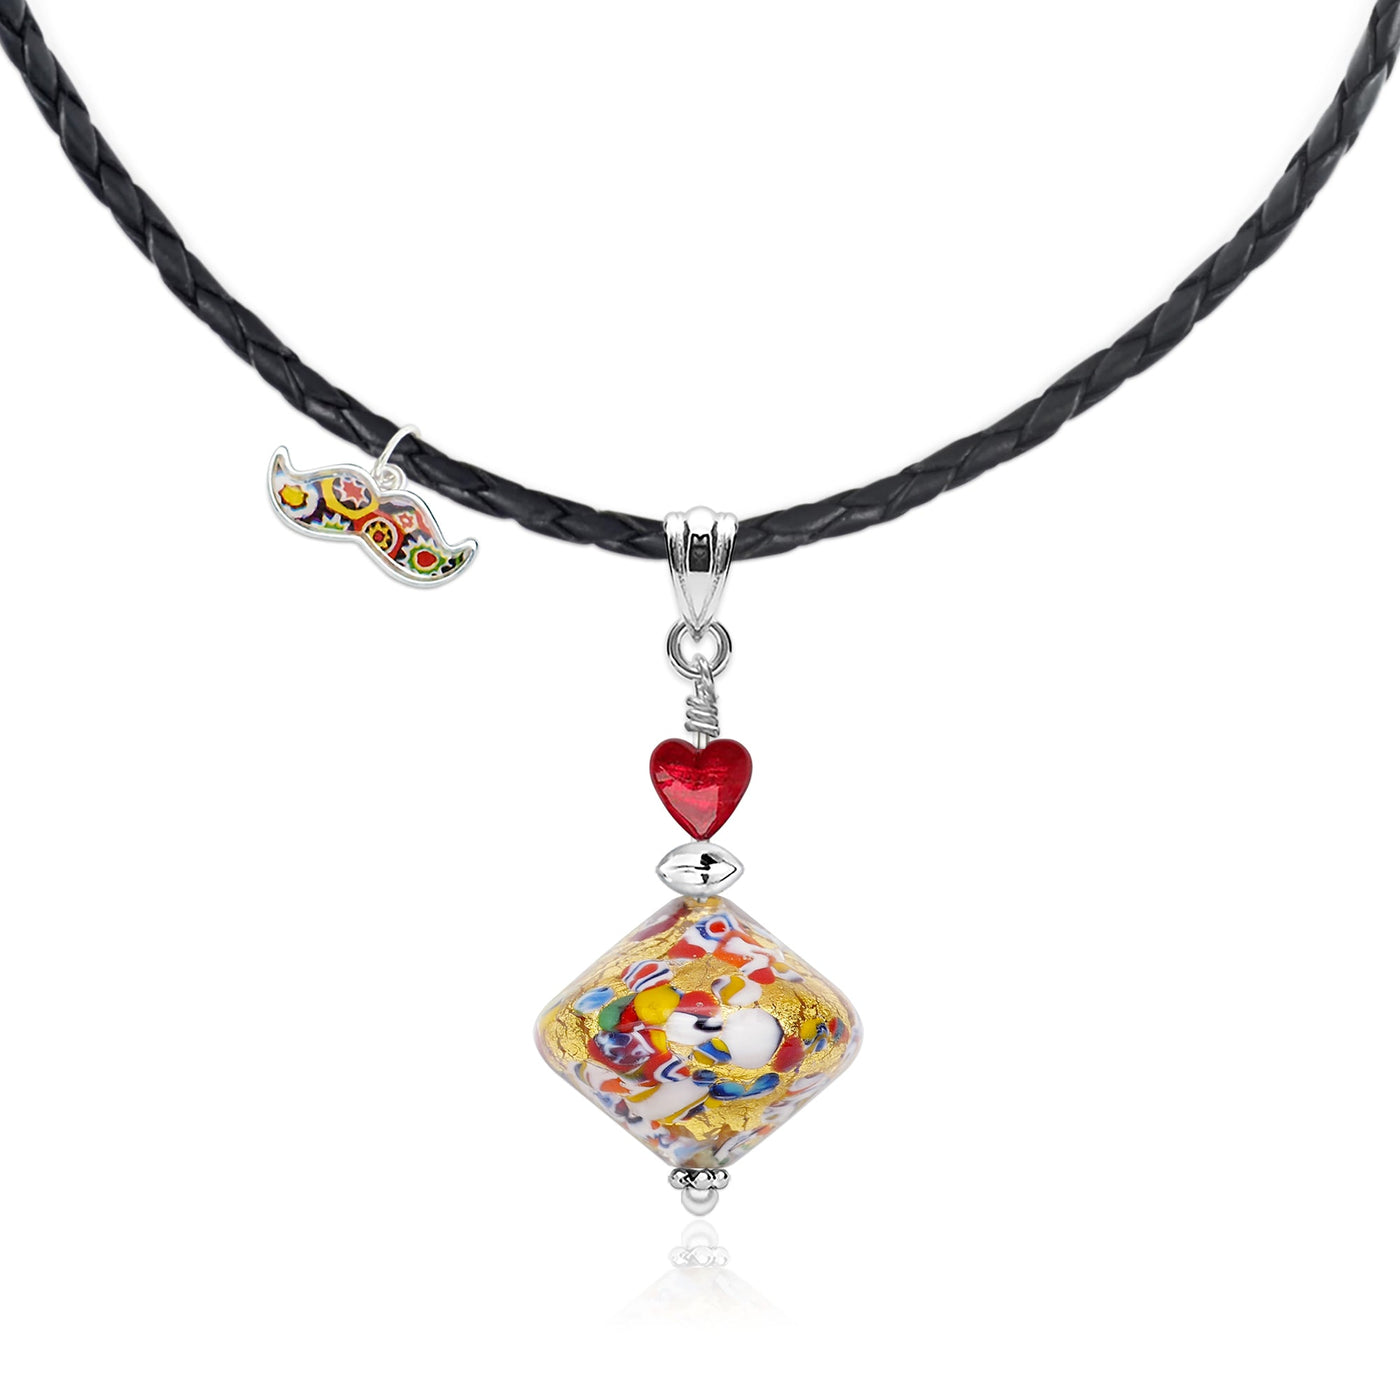 THE KISS | Elegance Pendant Necklace - Gold x Red Ball - Pendant Necklace